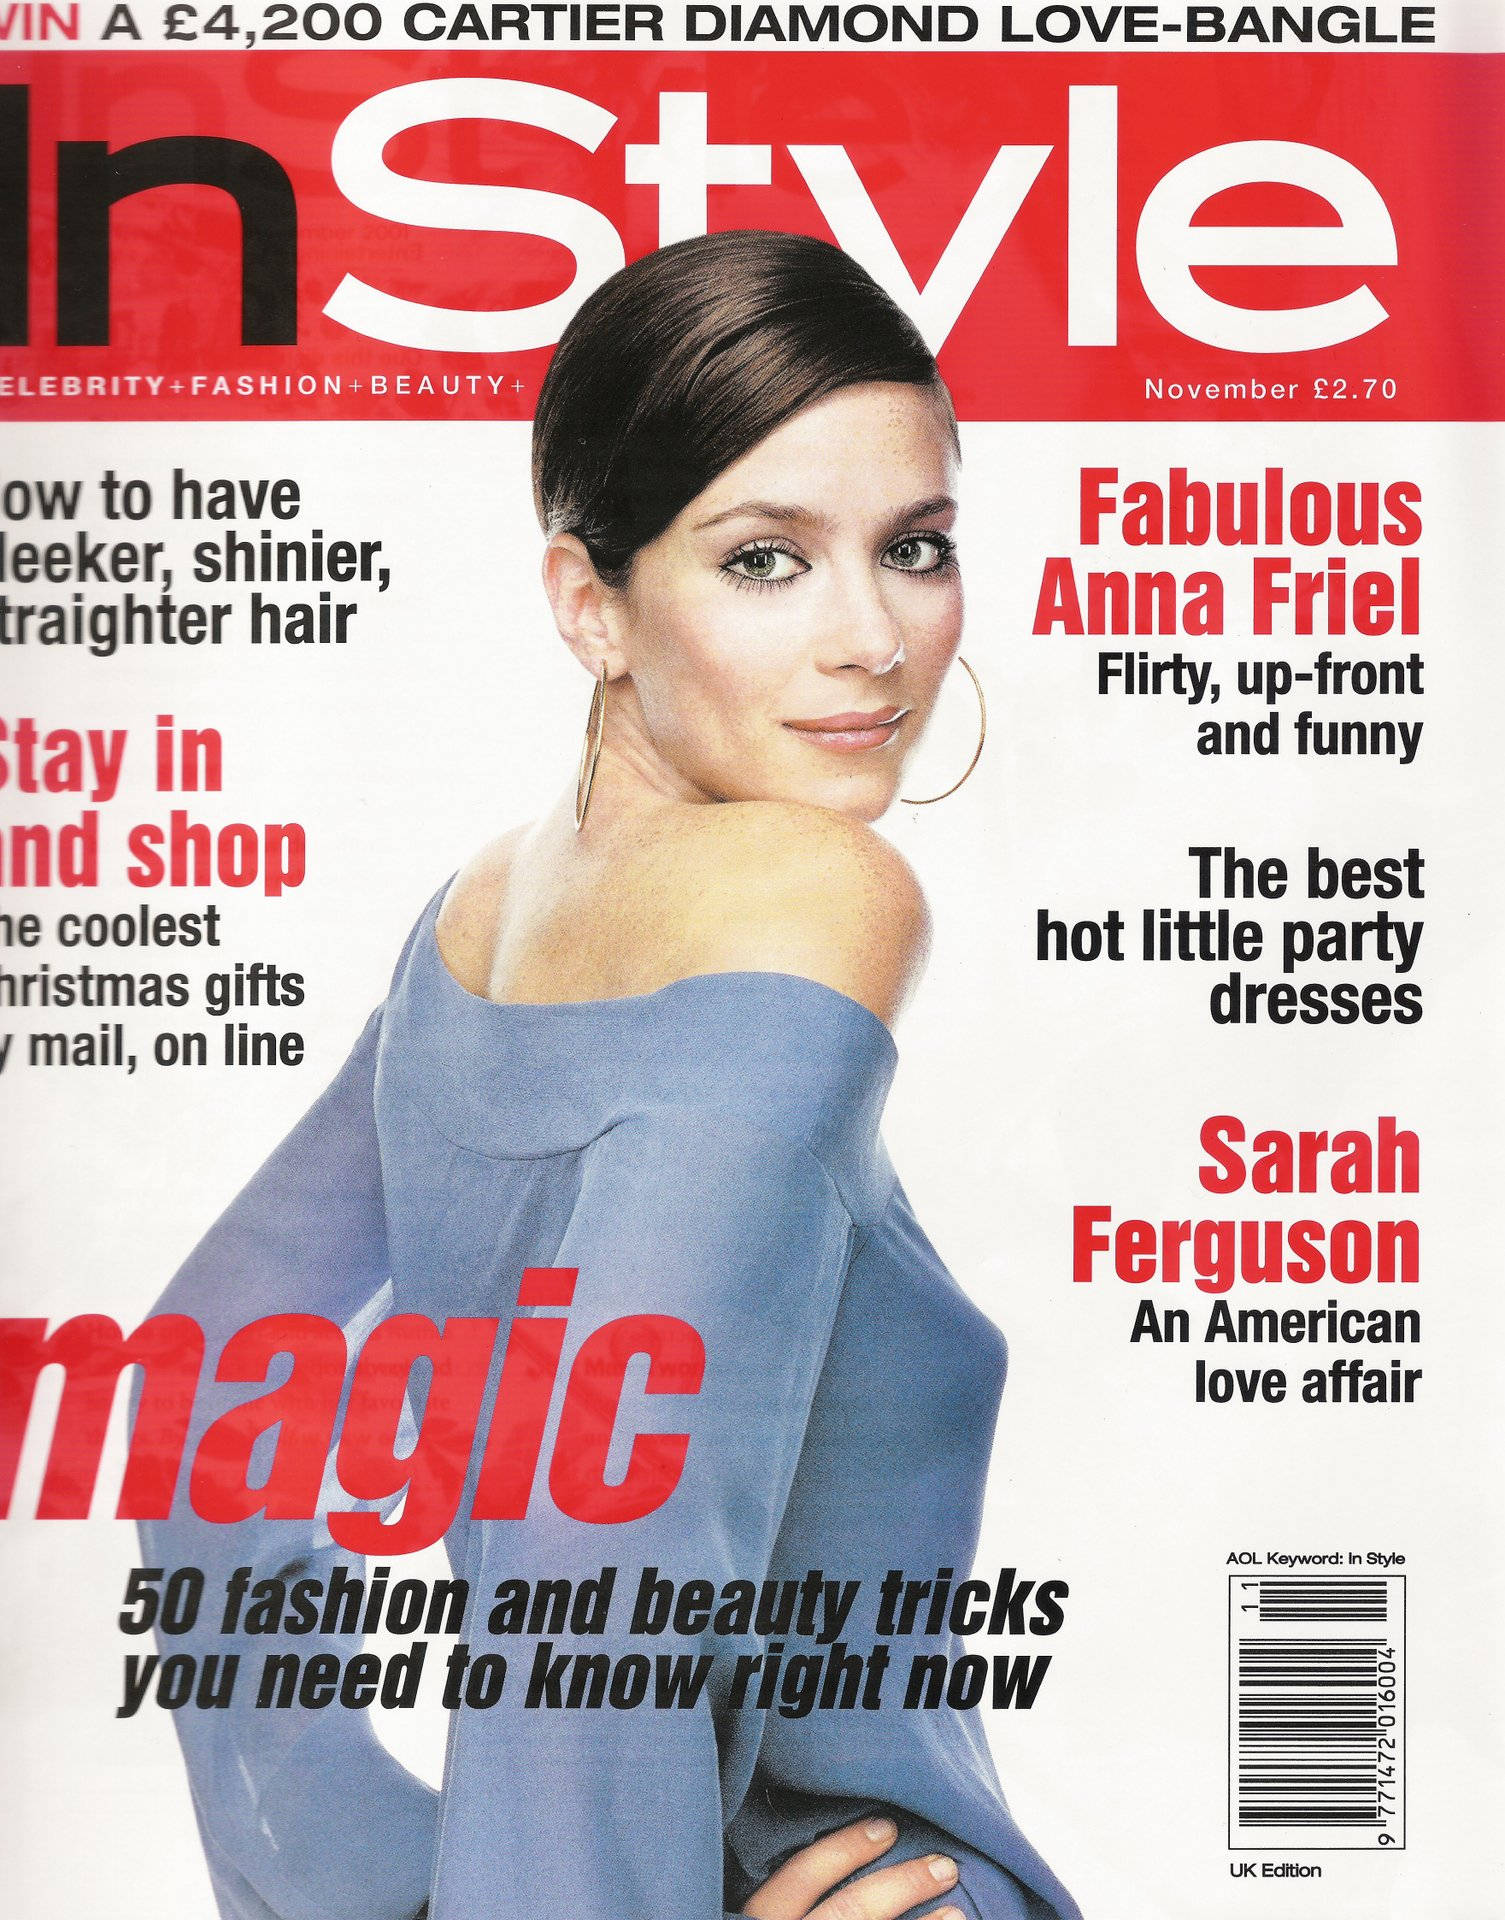 Anna Friel Fashion Beauty Cover Background